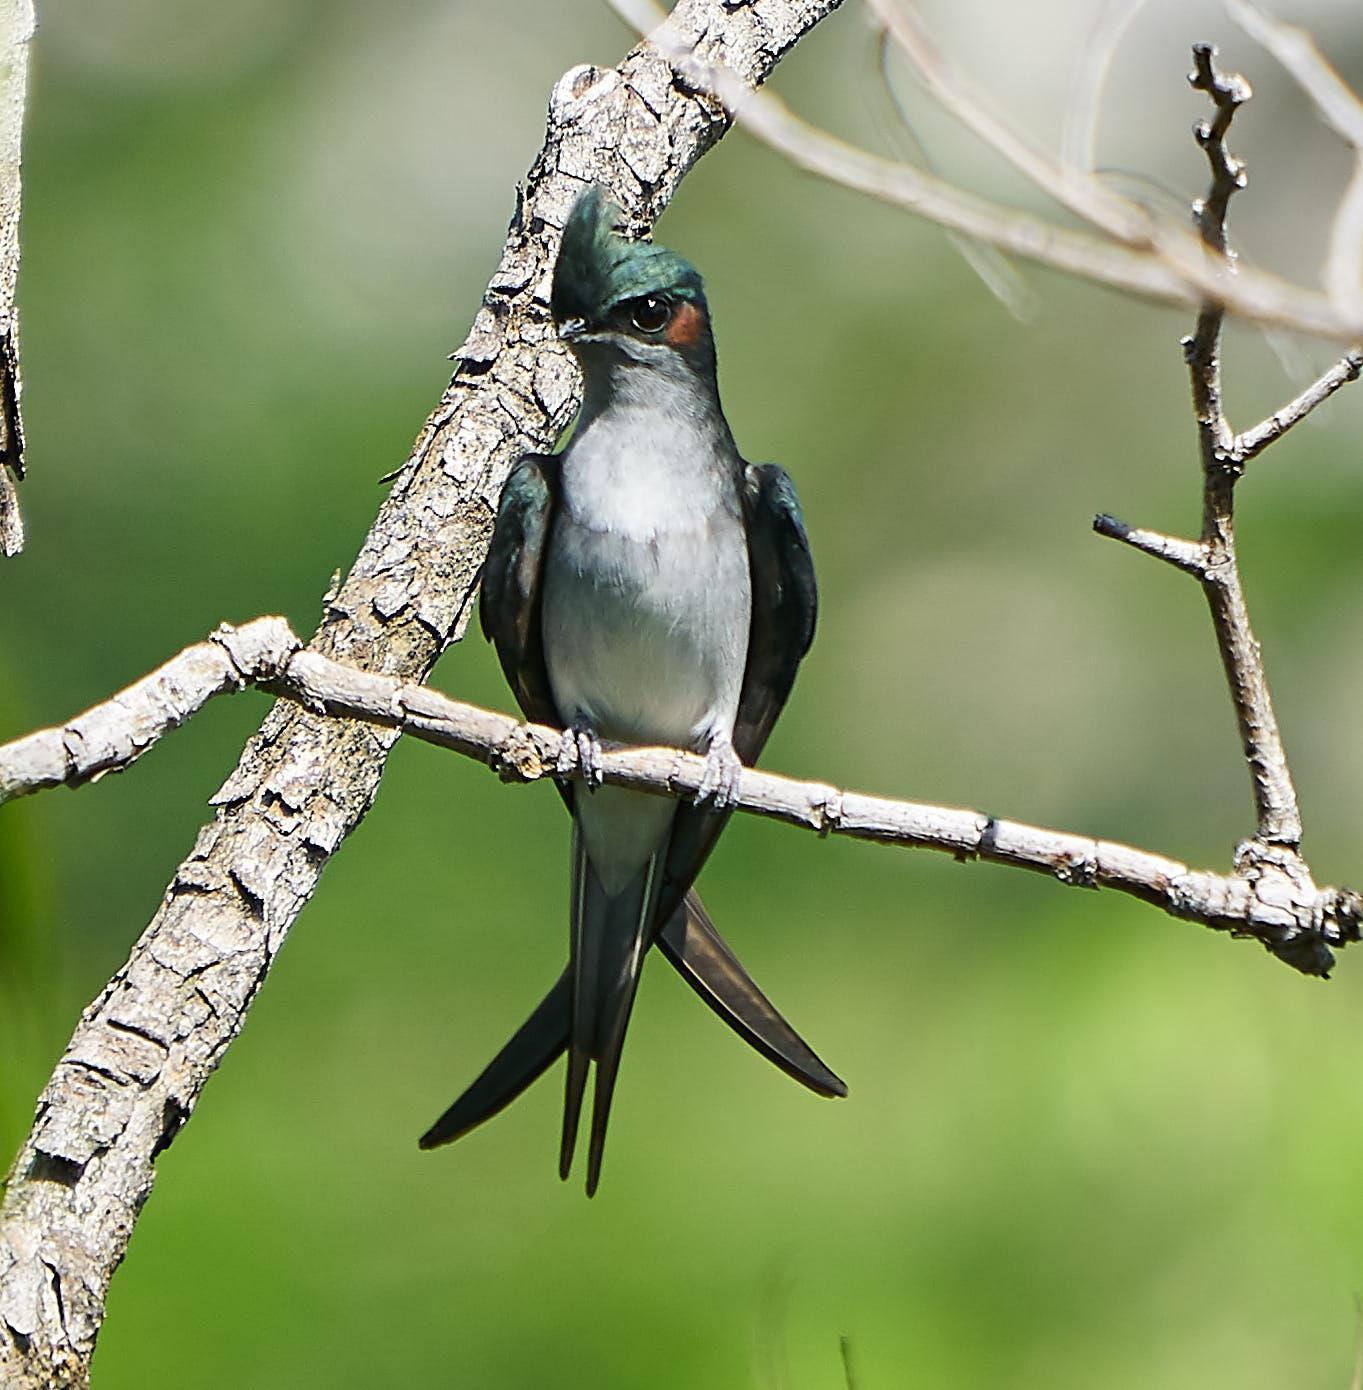 Gray-rumped Treeswift Photo by Steven Cheong